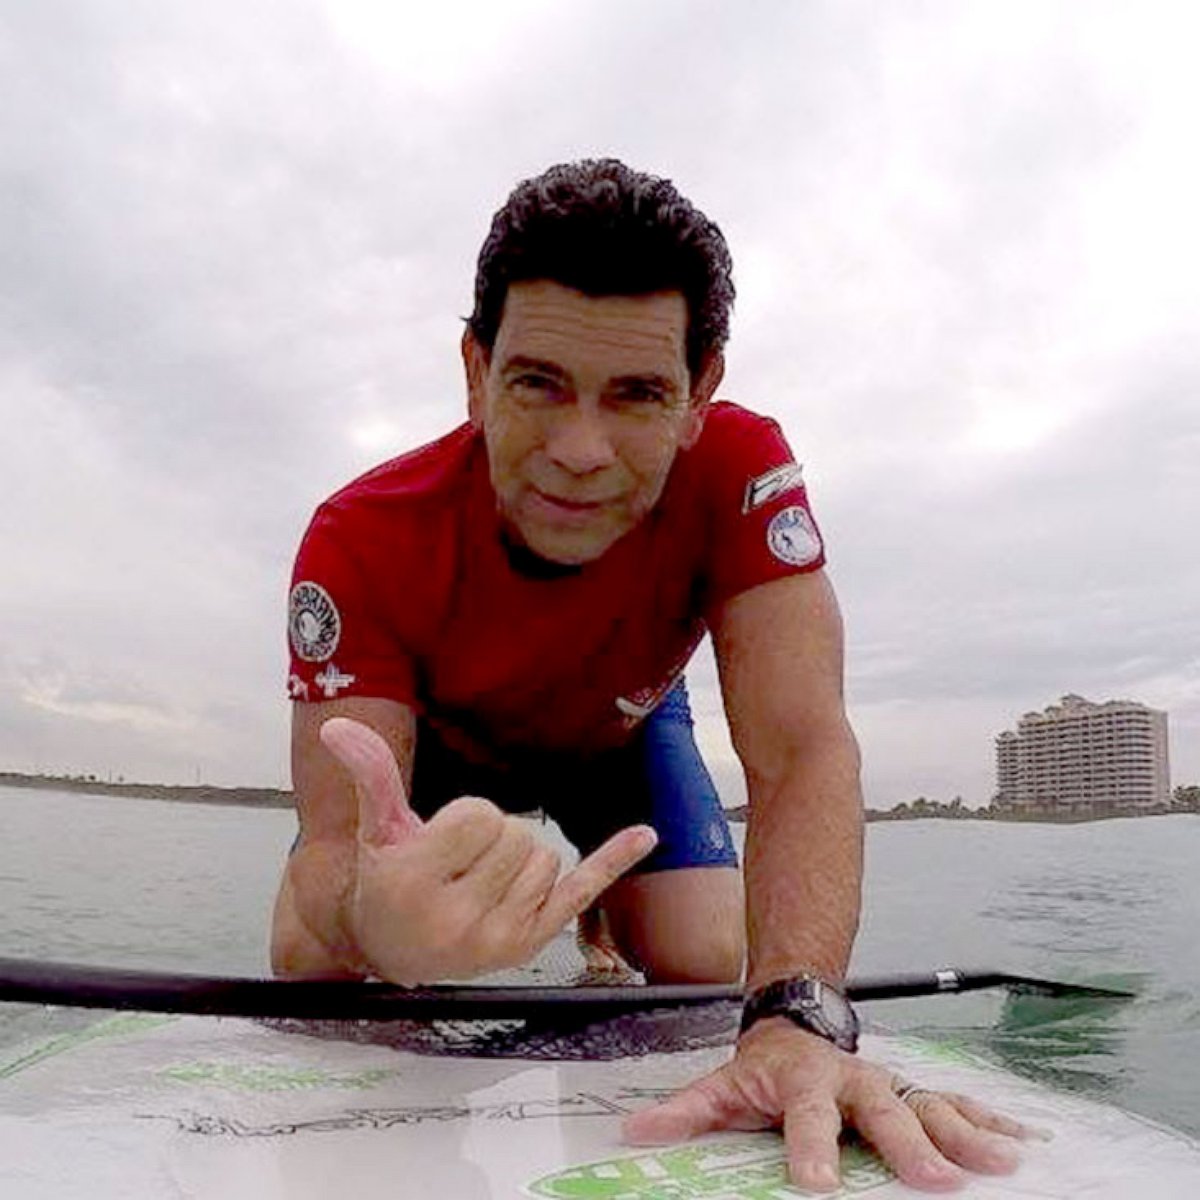 PHOTO: Maximo Trinidad enjoys paddle boarding in Florida. He says he will continue to enjoy the sport despite his close encounter with a shark.